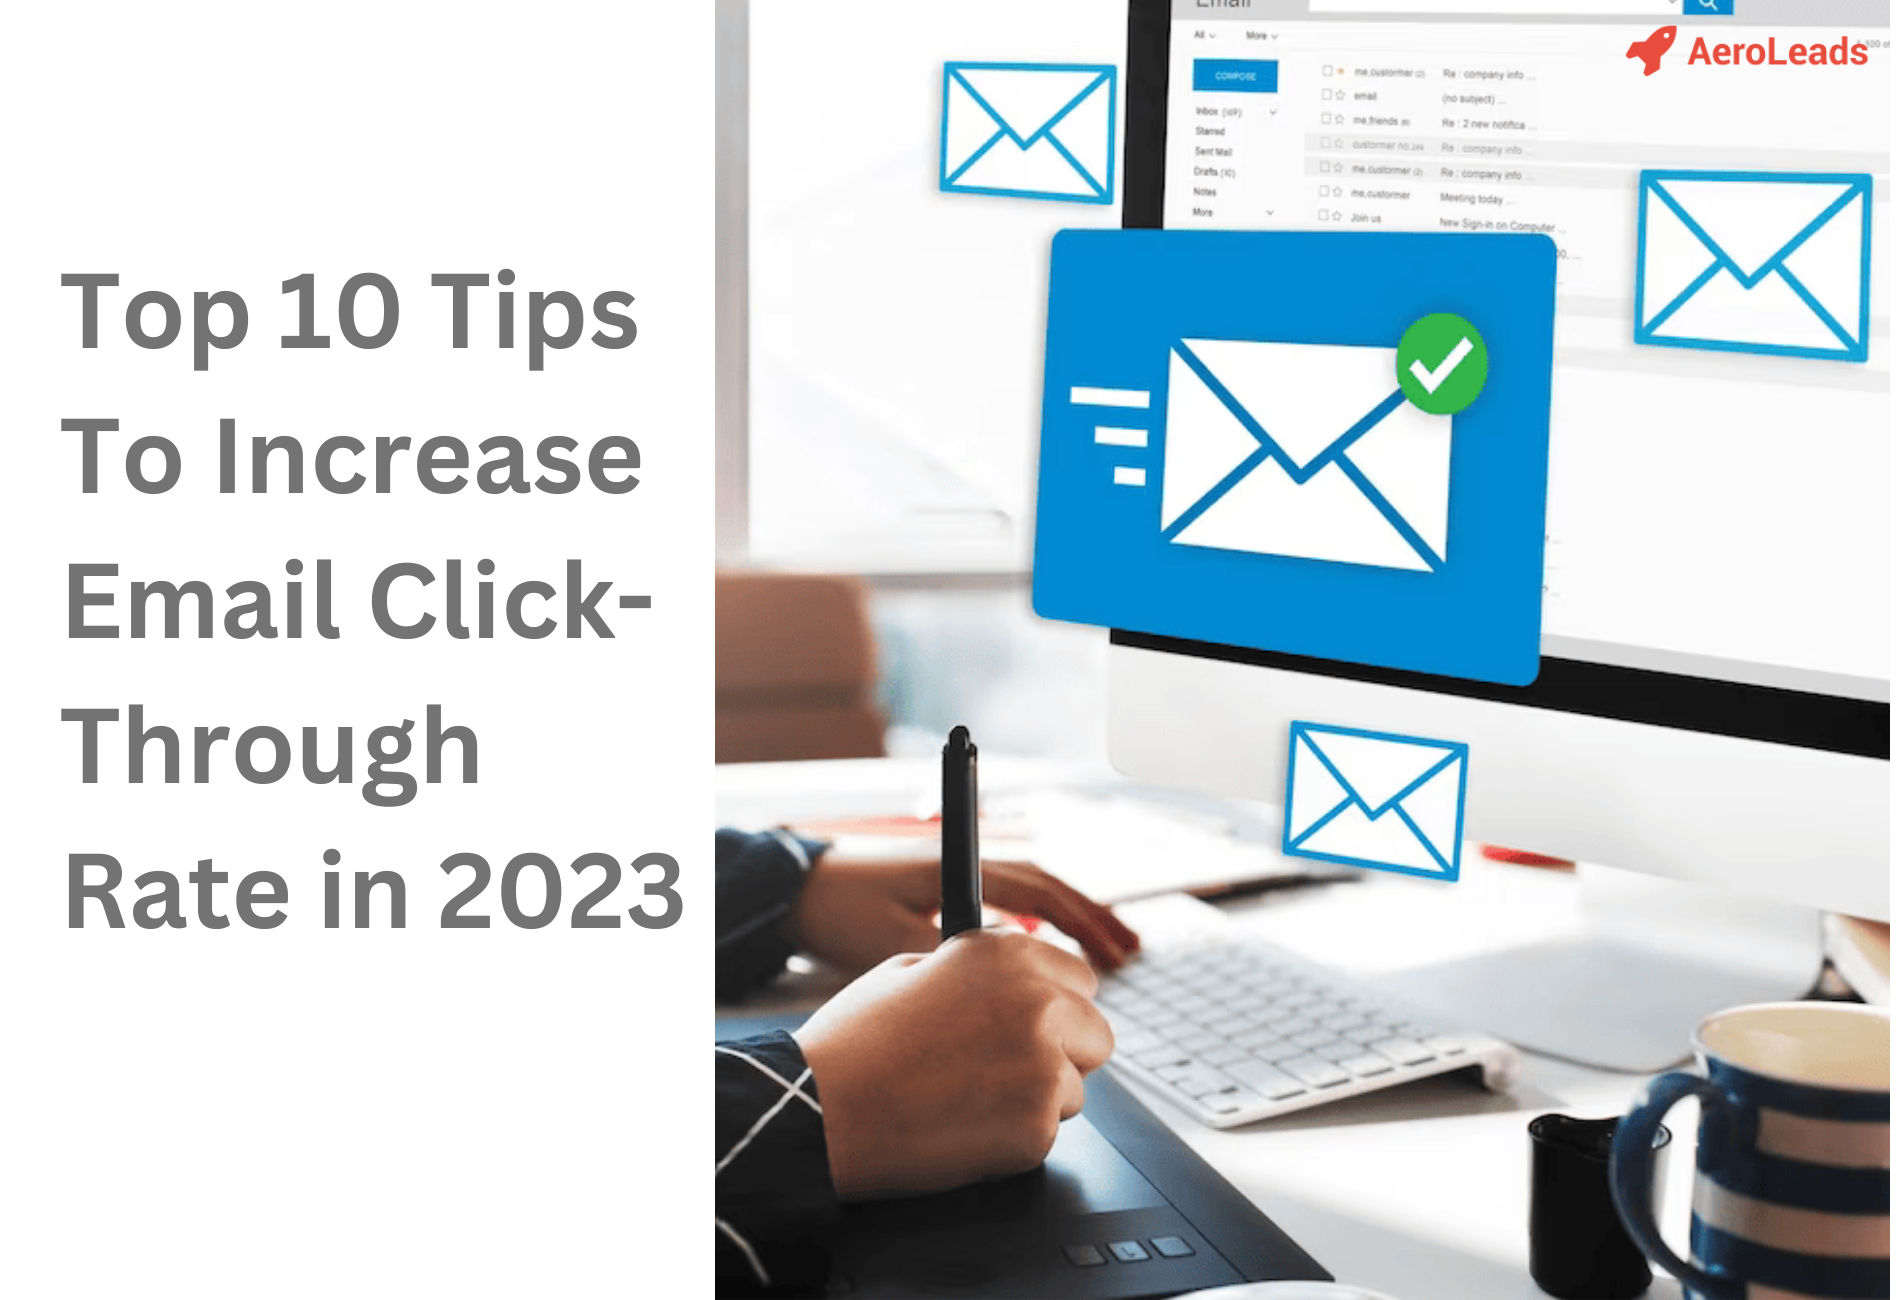 Top 10 Tips To Increase Email Click-Through Rate in 2023